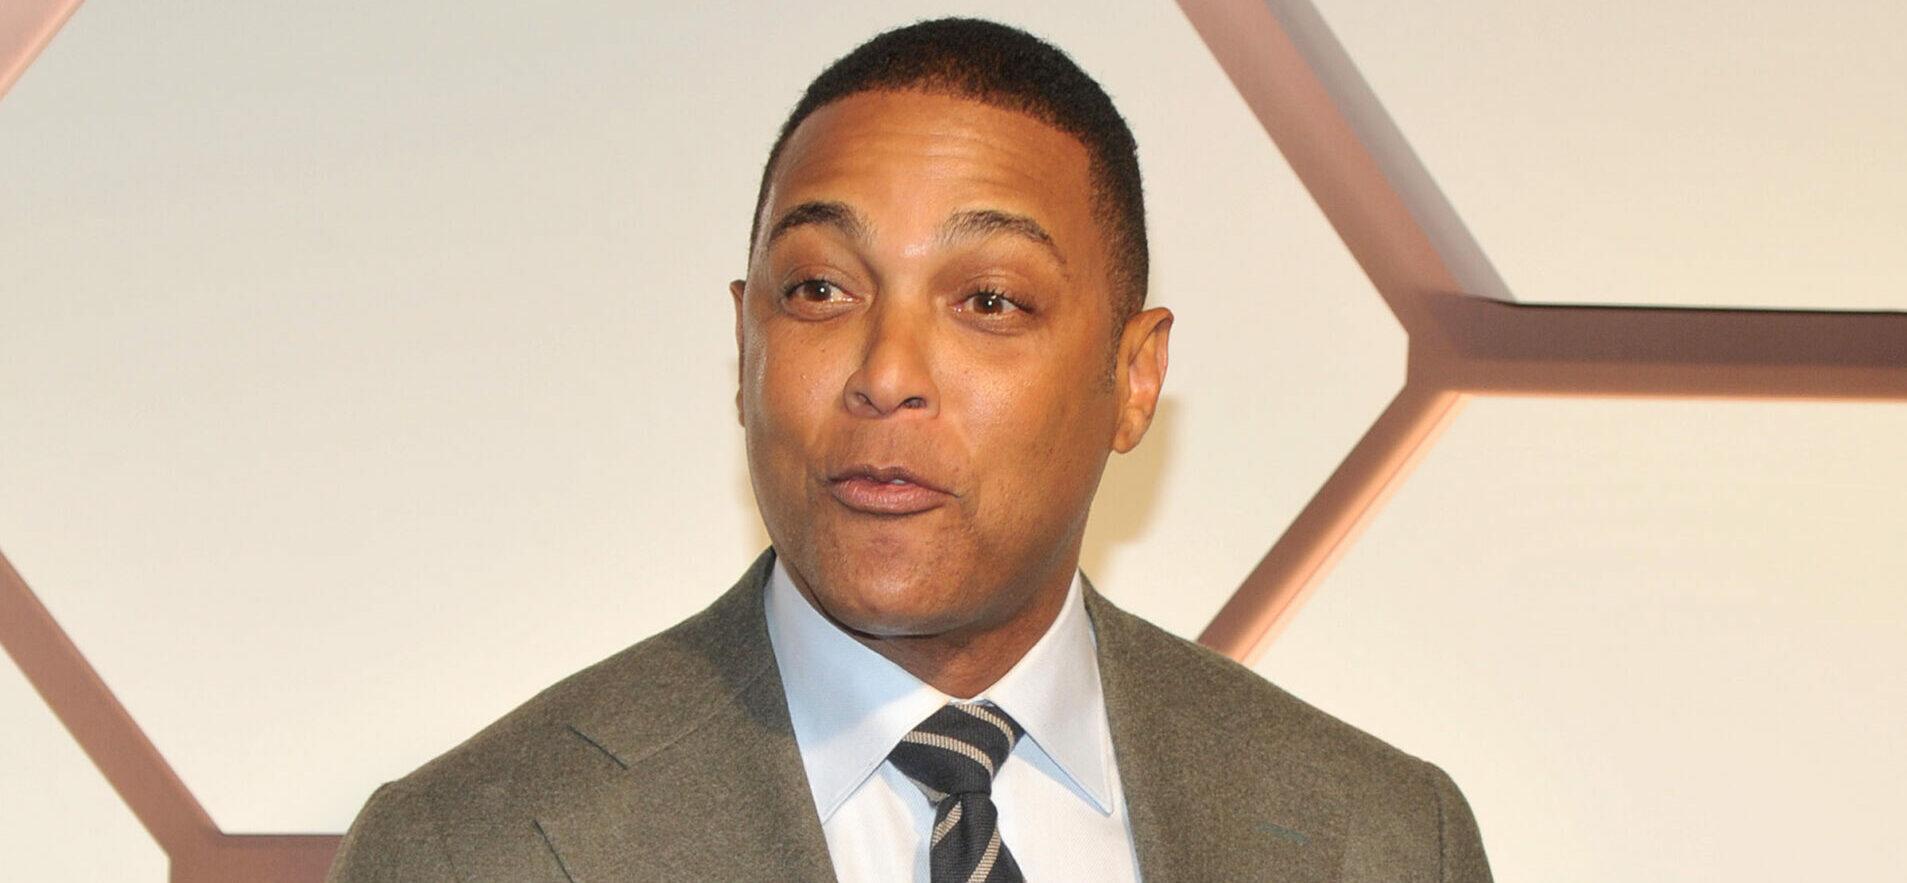 Don Lemon Shares What He Plans To Do Next After Being Fired By CNN